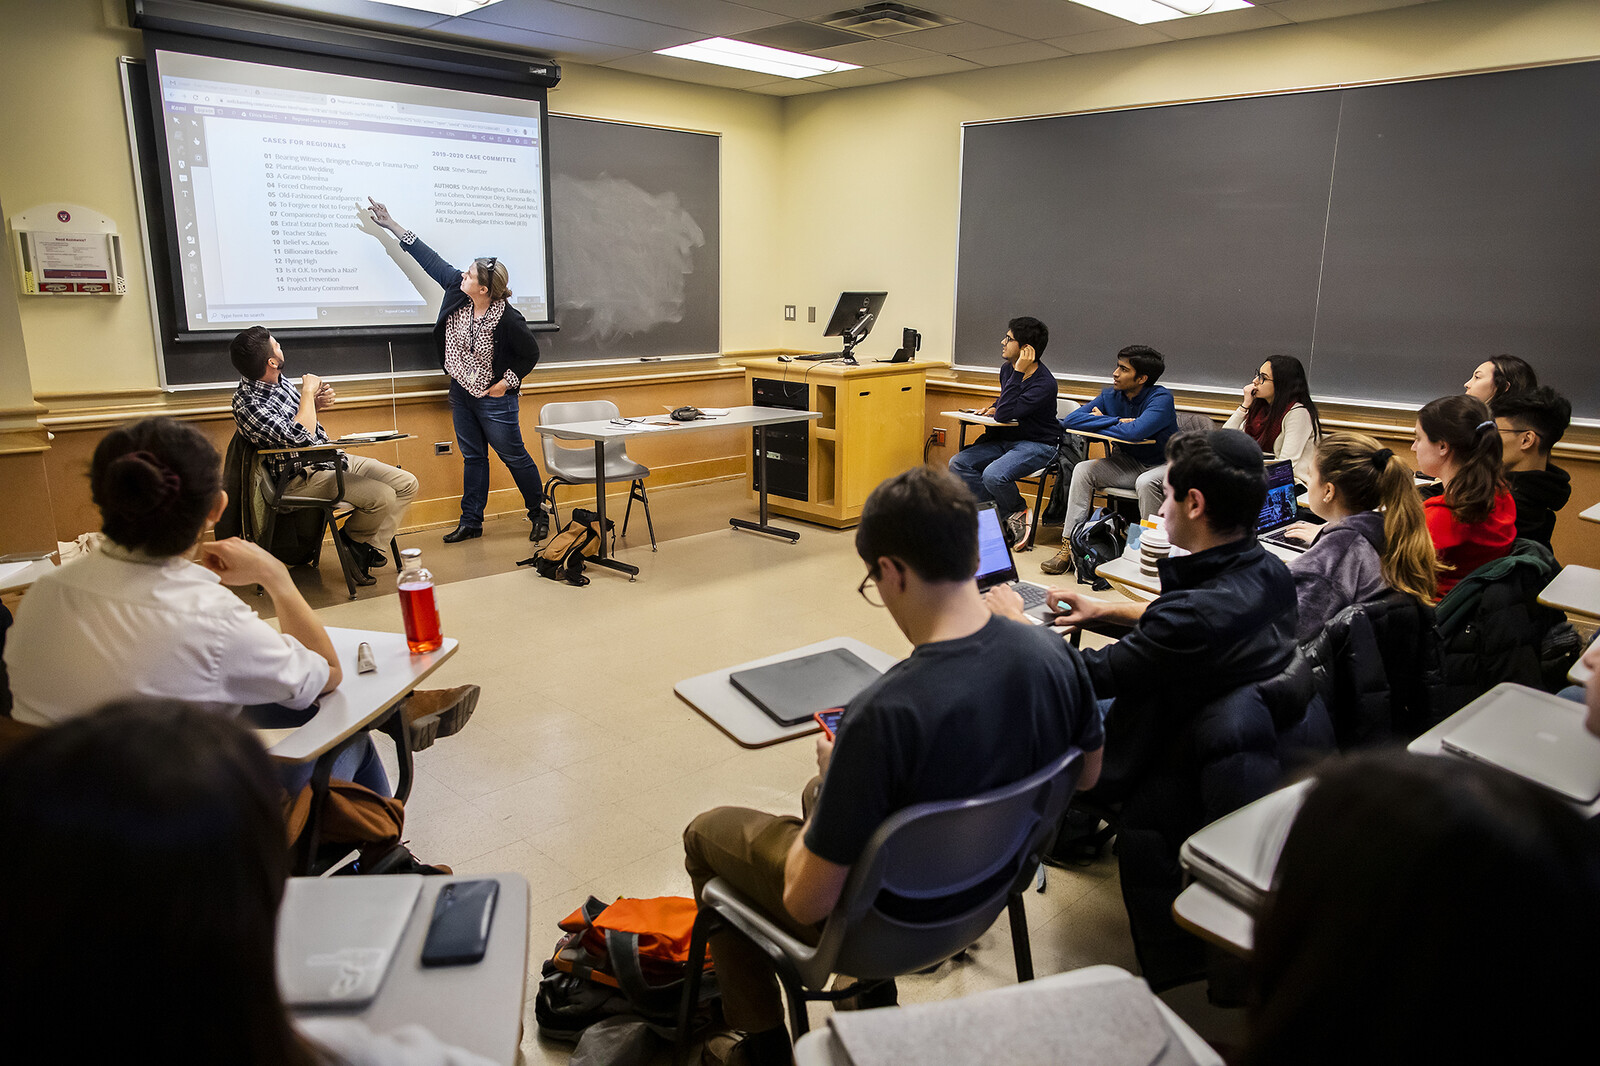 Penn students engaged in learning in an undergraduate class